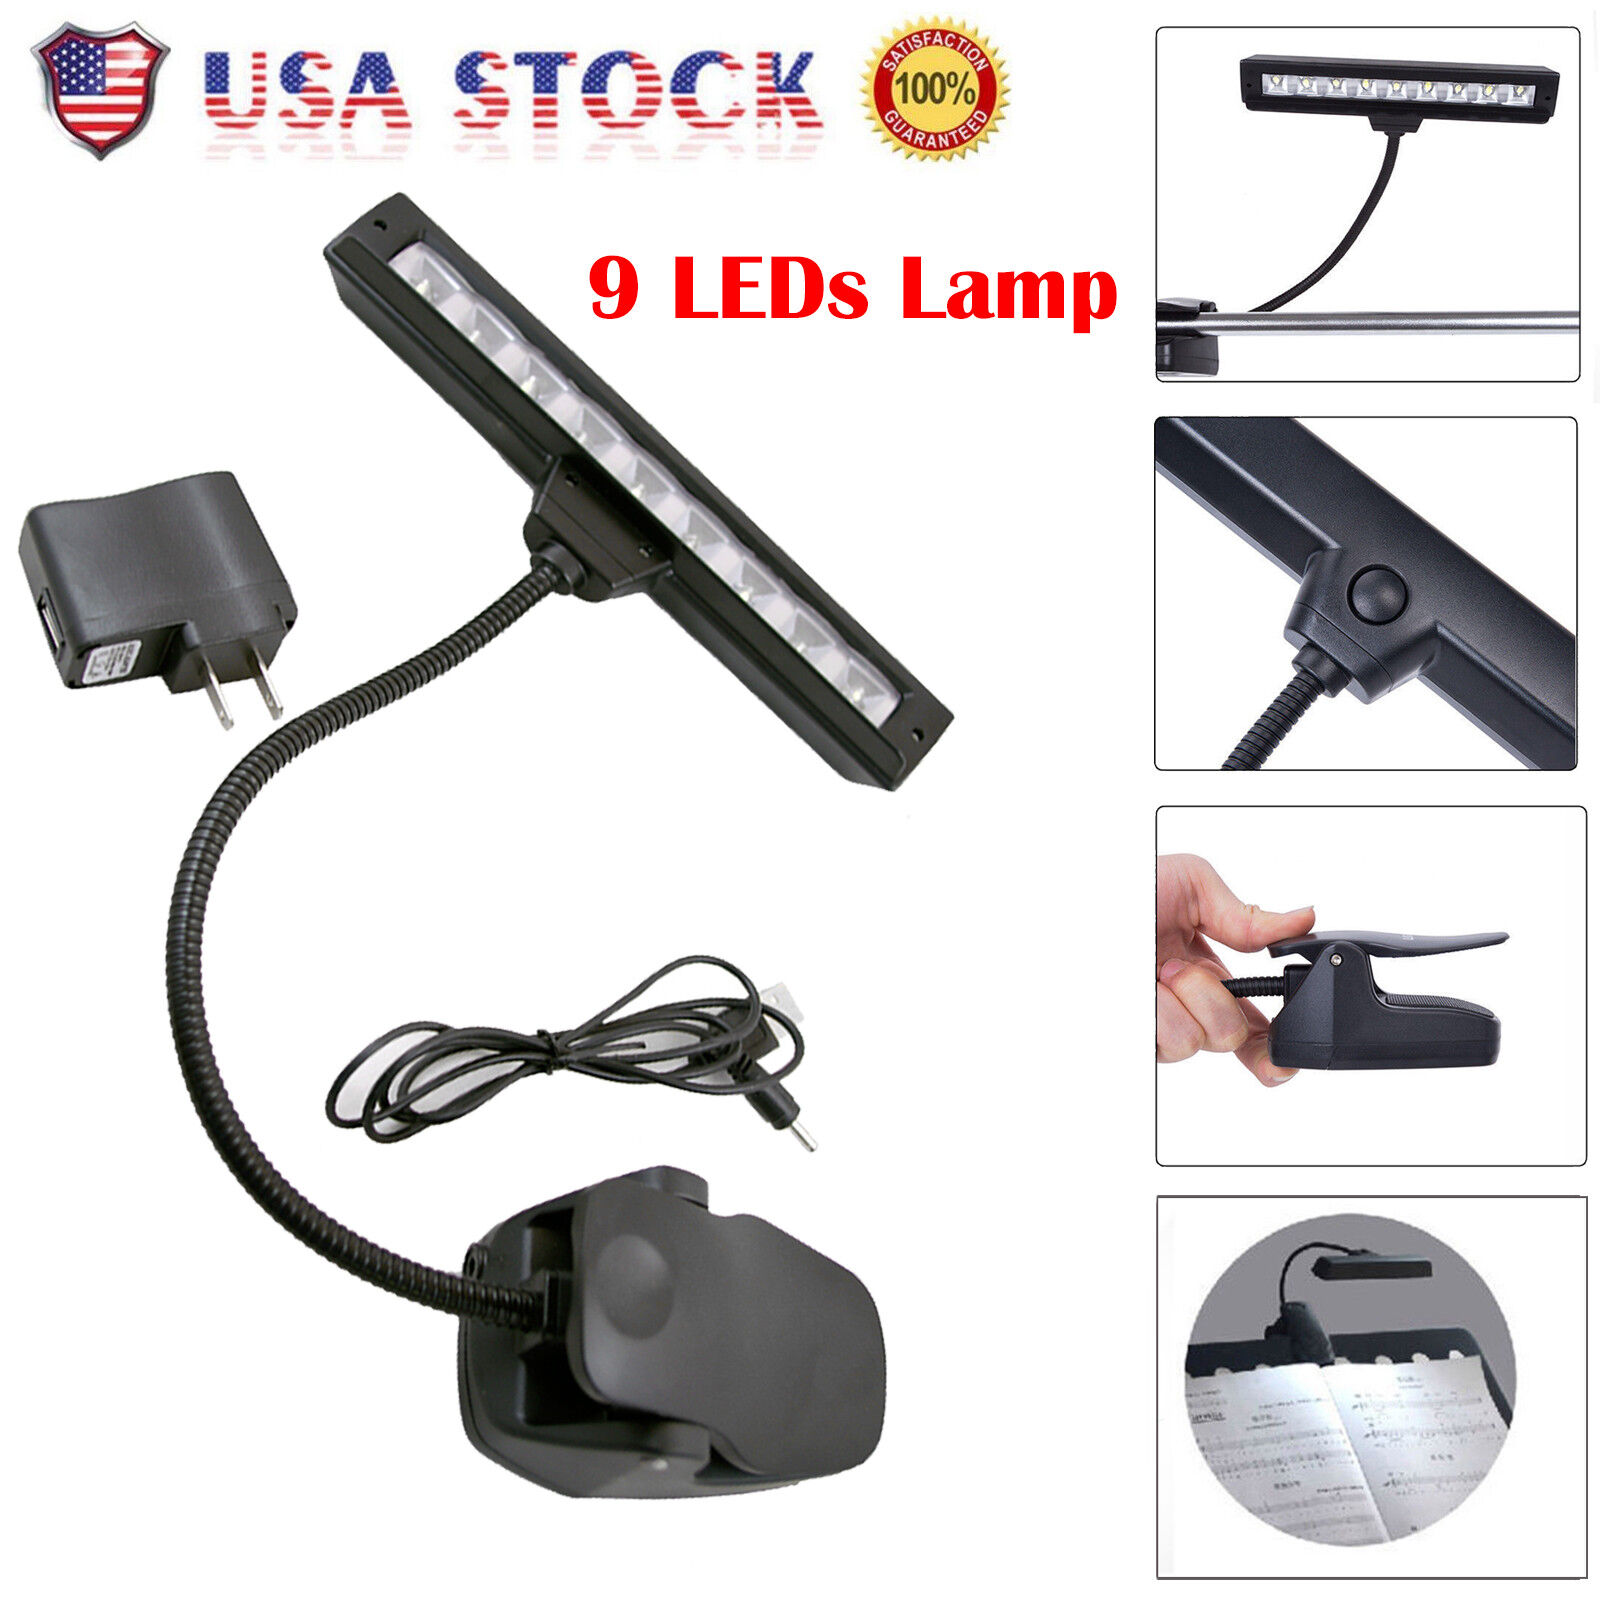 Lamp Light Black Flexible 9 LEDs Clip-On Orchestra Music Stand With Adapter Unbranded/Generic Does Not Apply